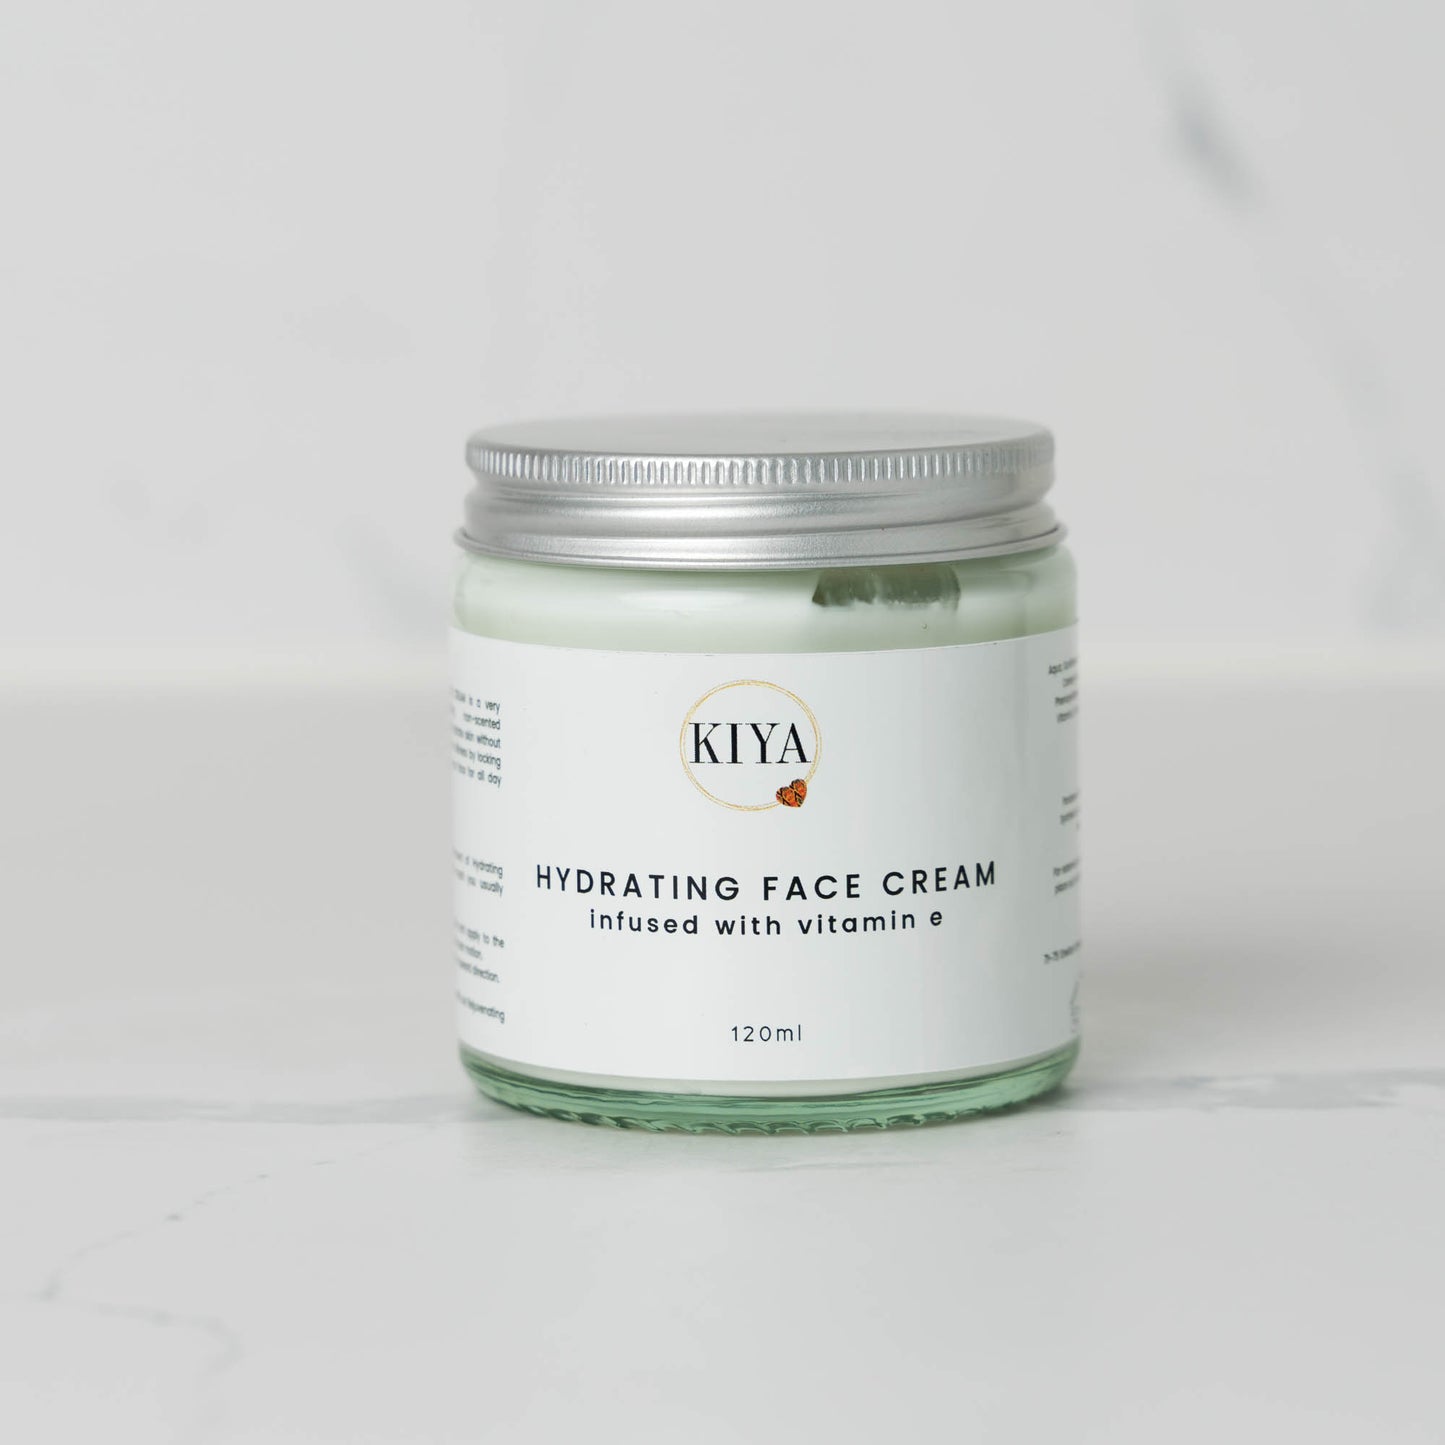 HYDRATING FACE CREAM infused with vitamin E